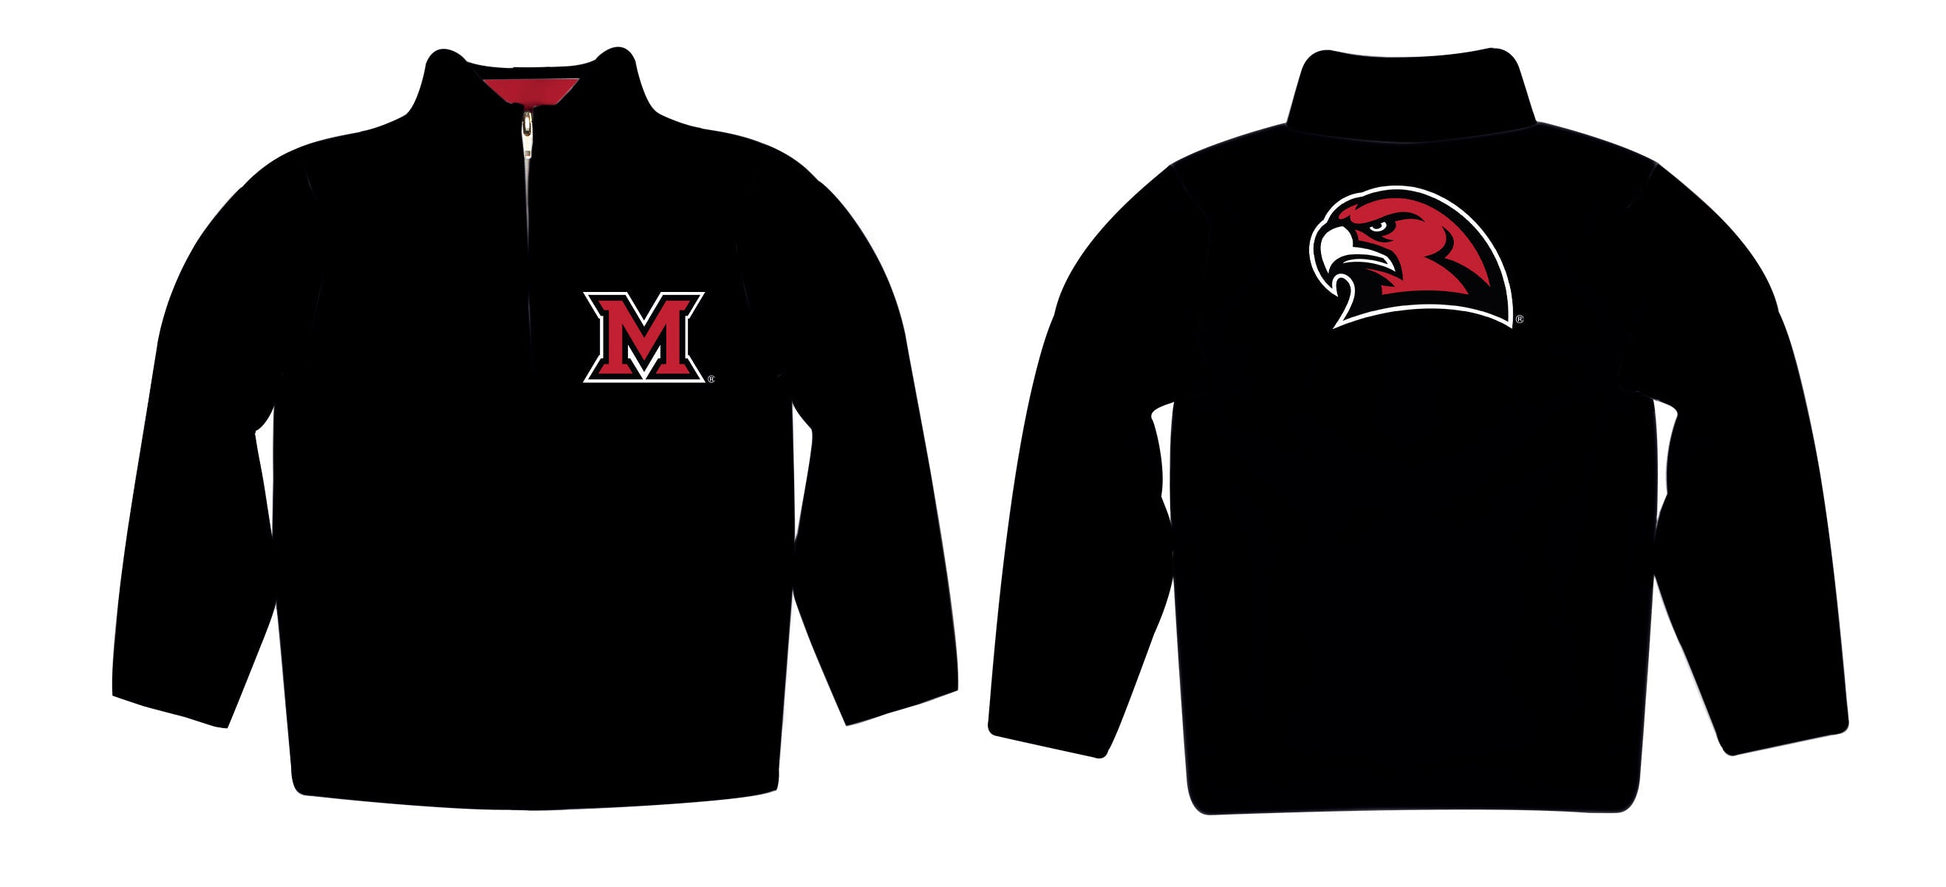 Miami Ohio RedHawks Game Day Solid Black Quarter Zip Pullover for Infants Toddlers by Vive La Fete